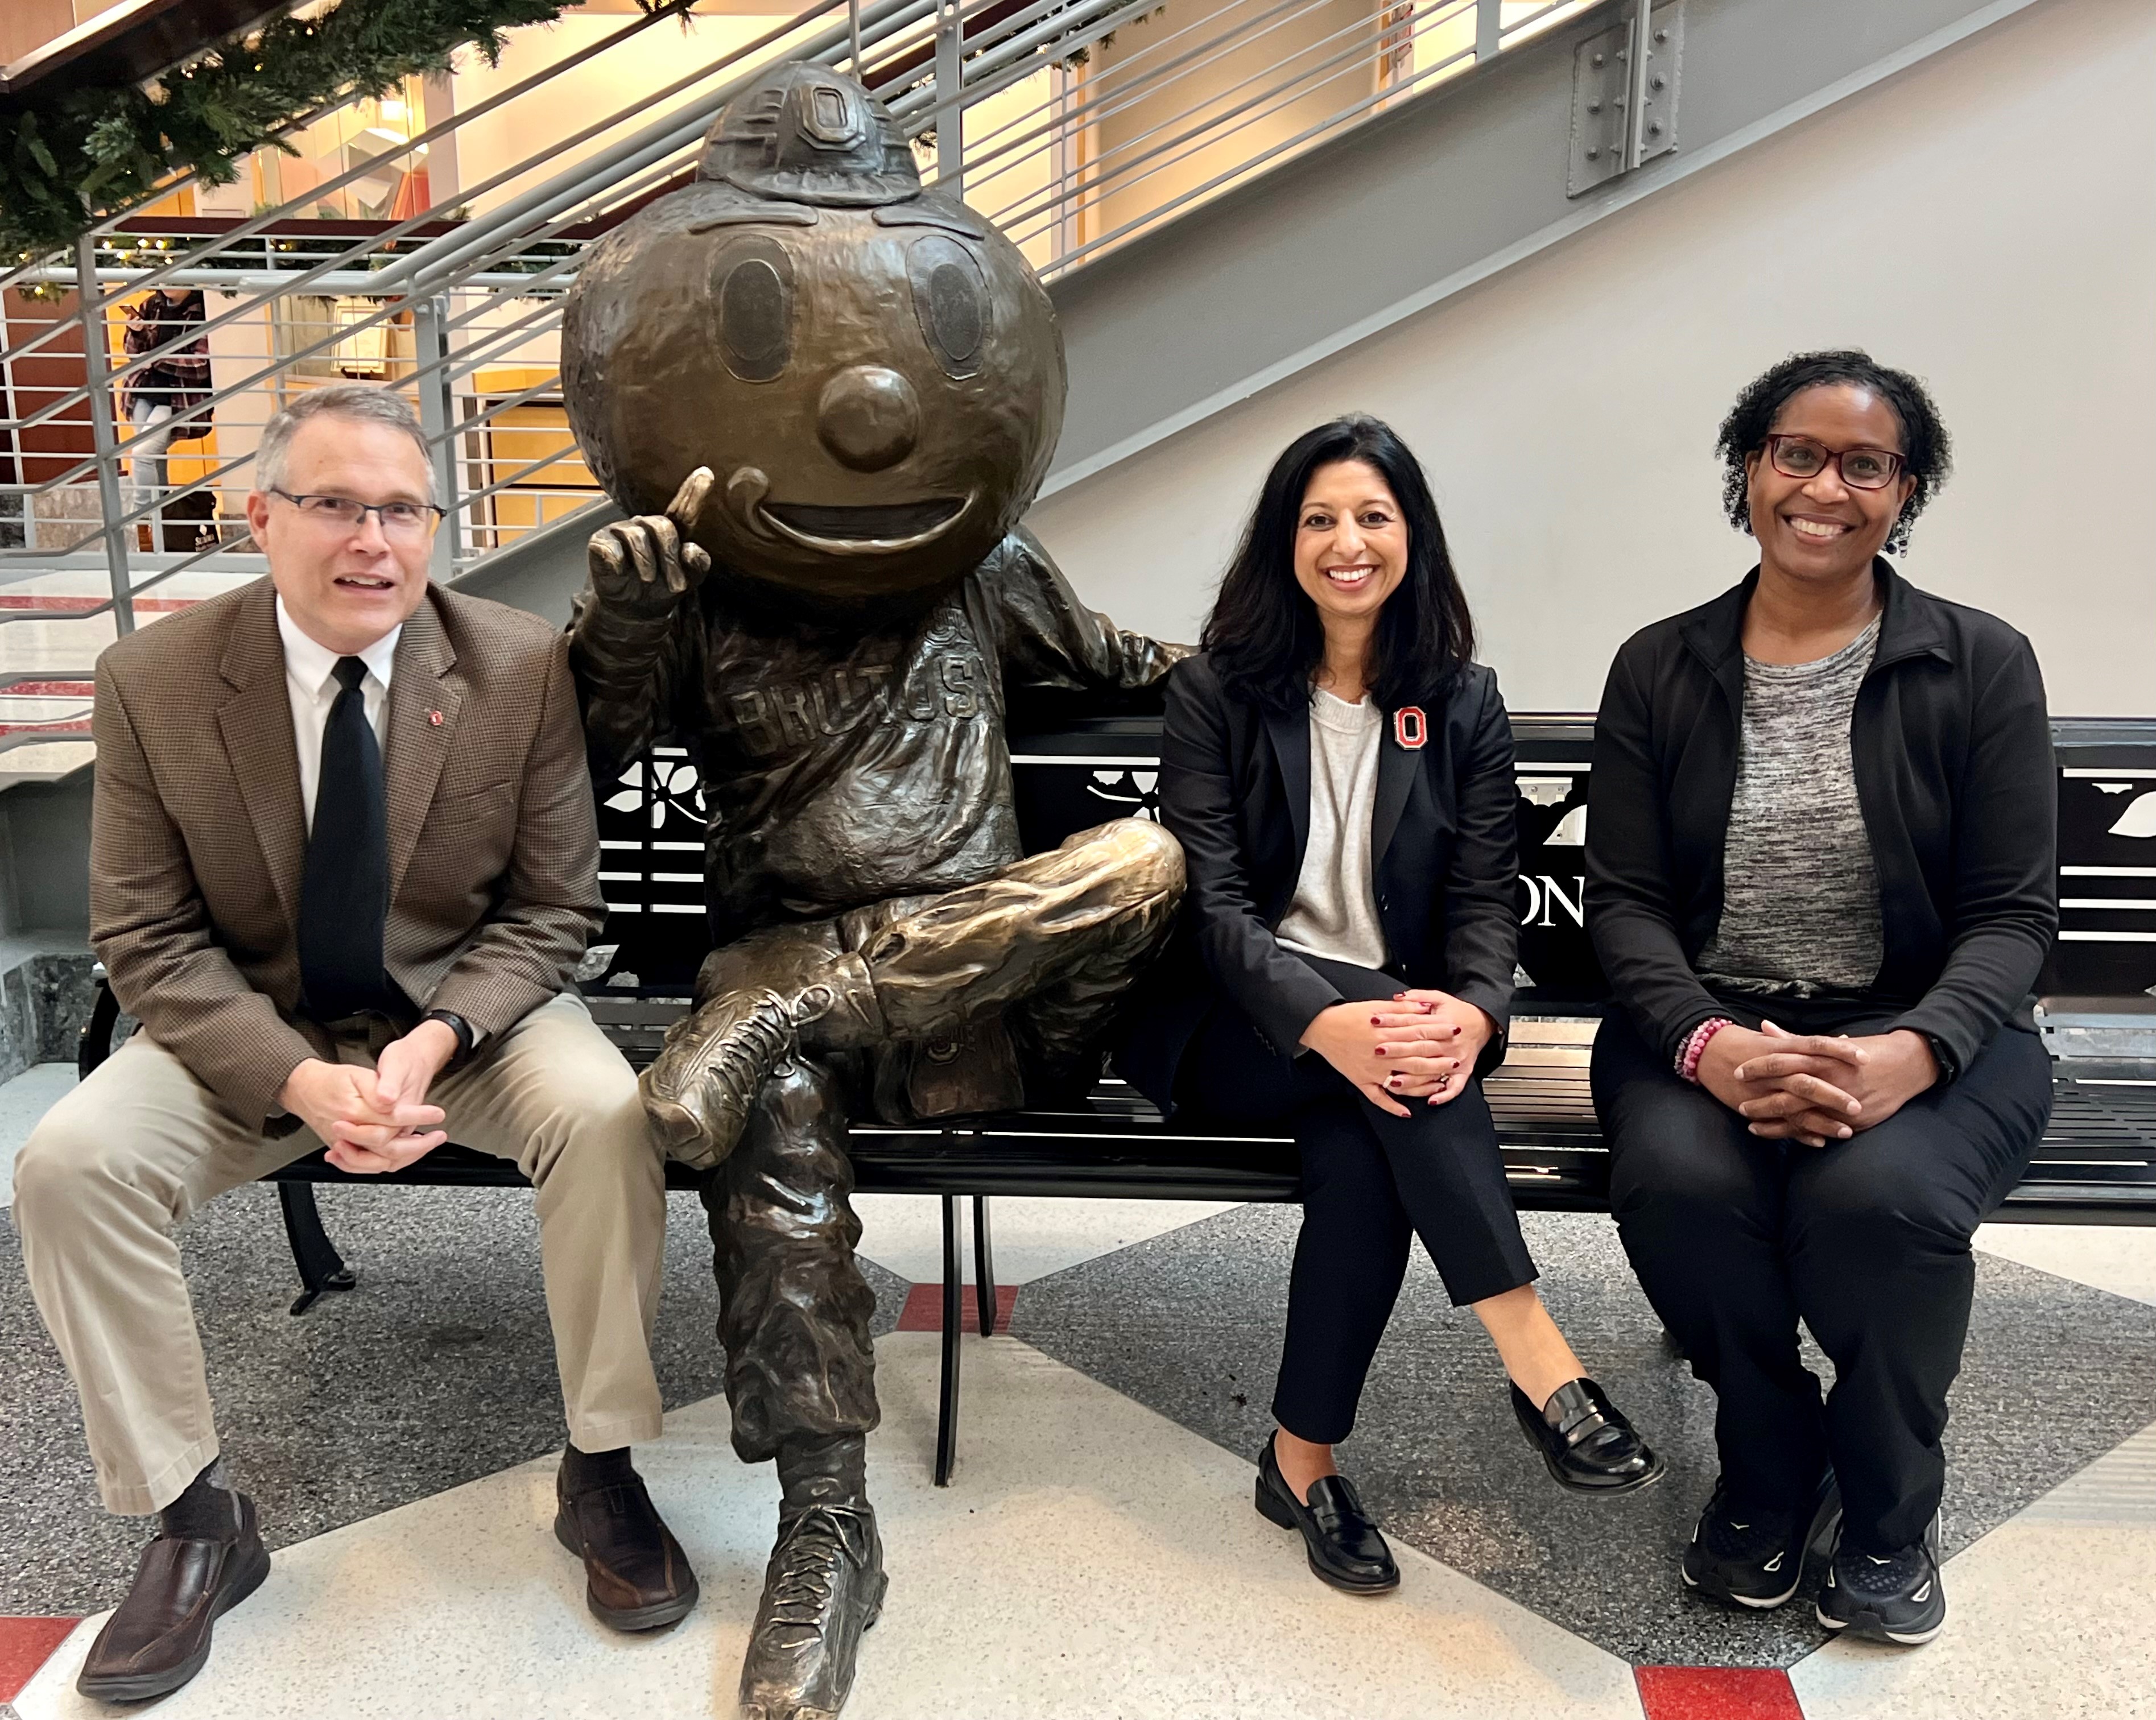 dr mcauley, broze brutus statue, dr mehta, ms henderson on a bench